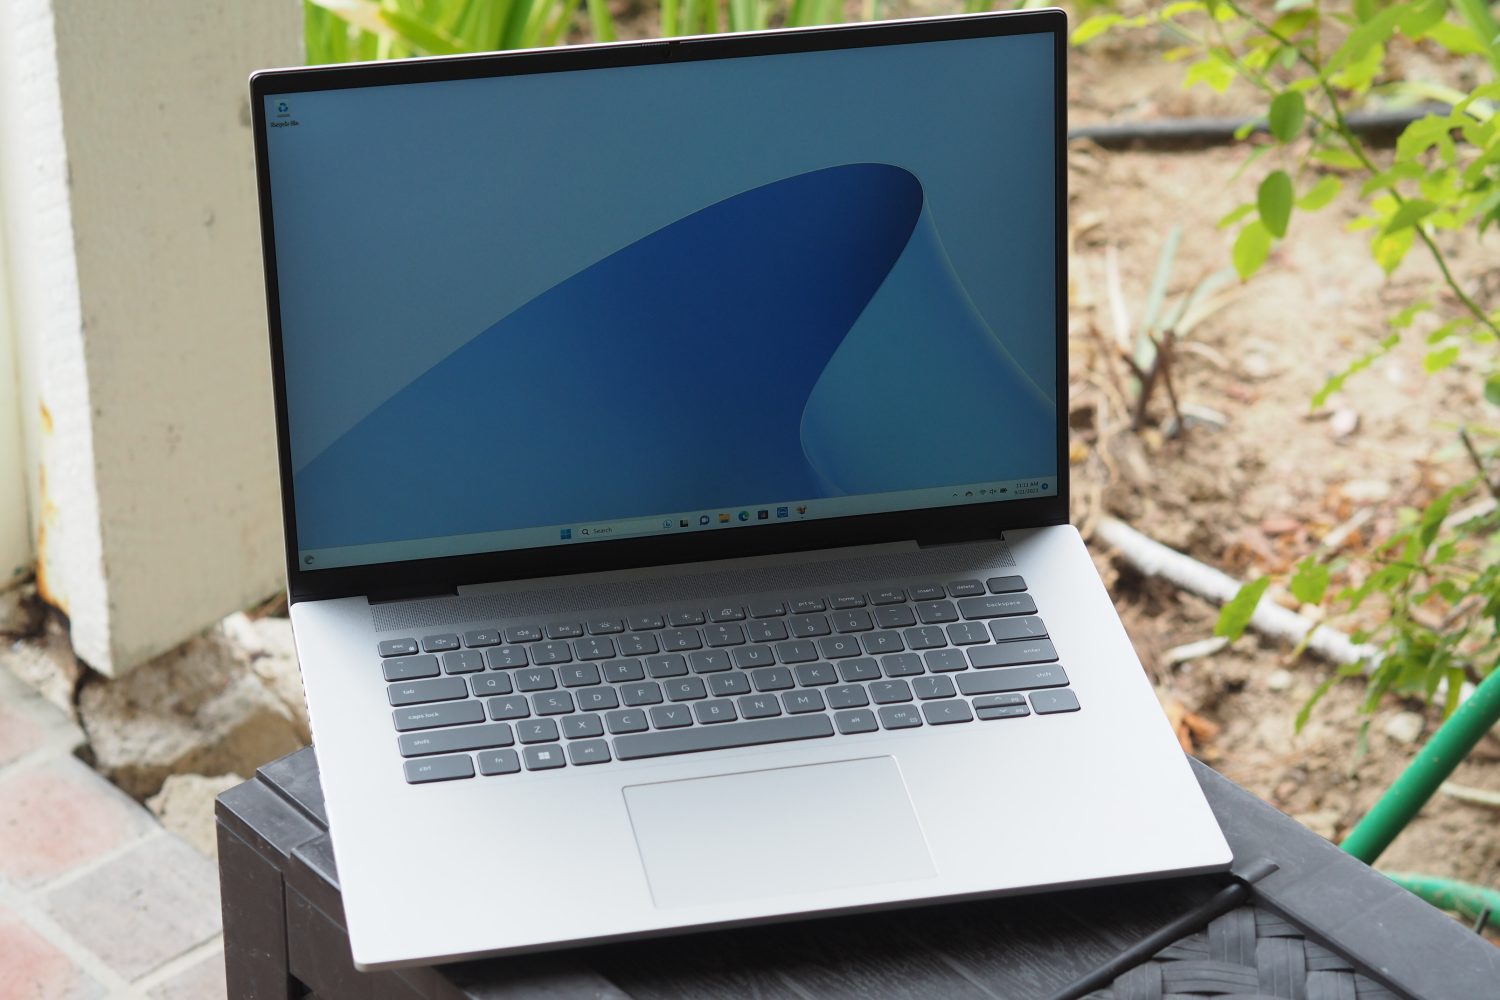 Dell Inspiron 16 Plus review: premium price without luxury